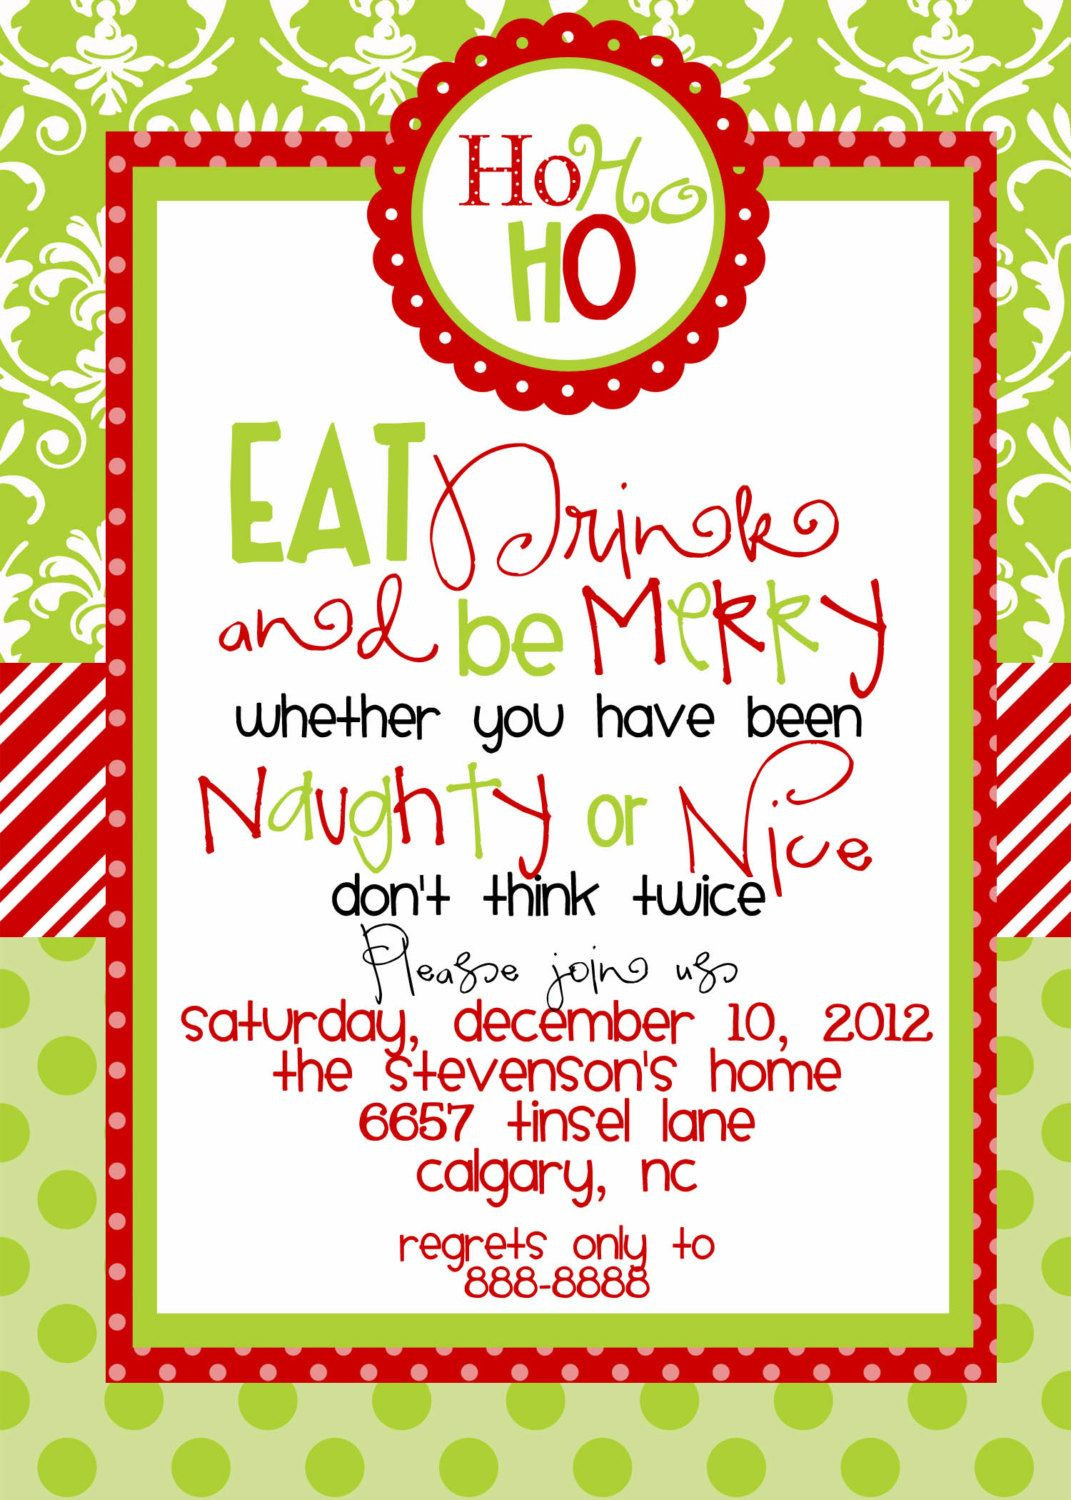 21-ideas-for-holiday-party-invitation-ideas-home-family-style-and-art-ideas